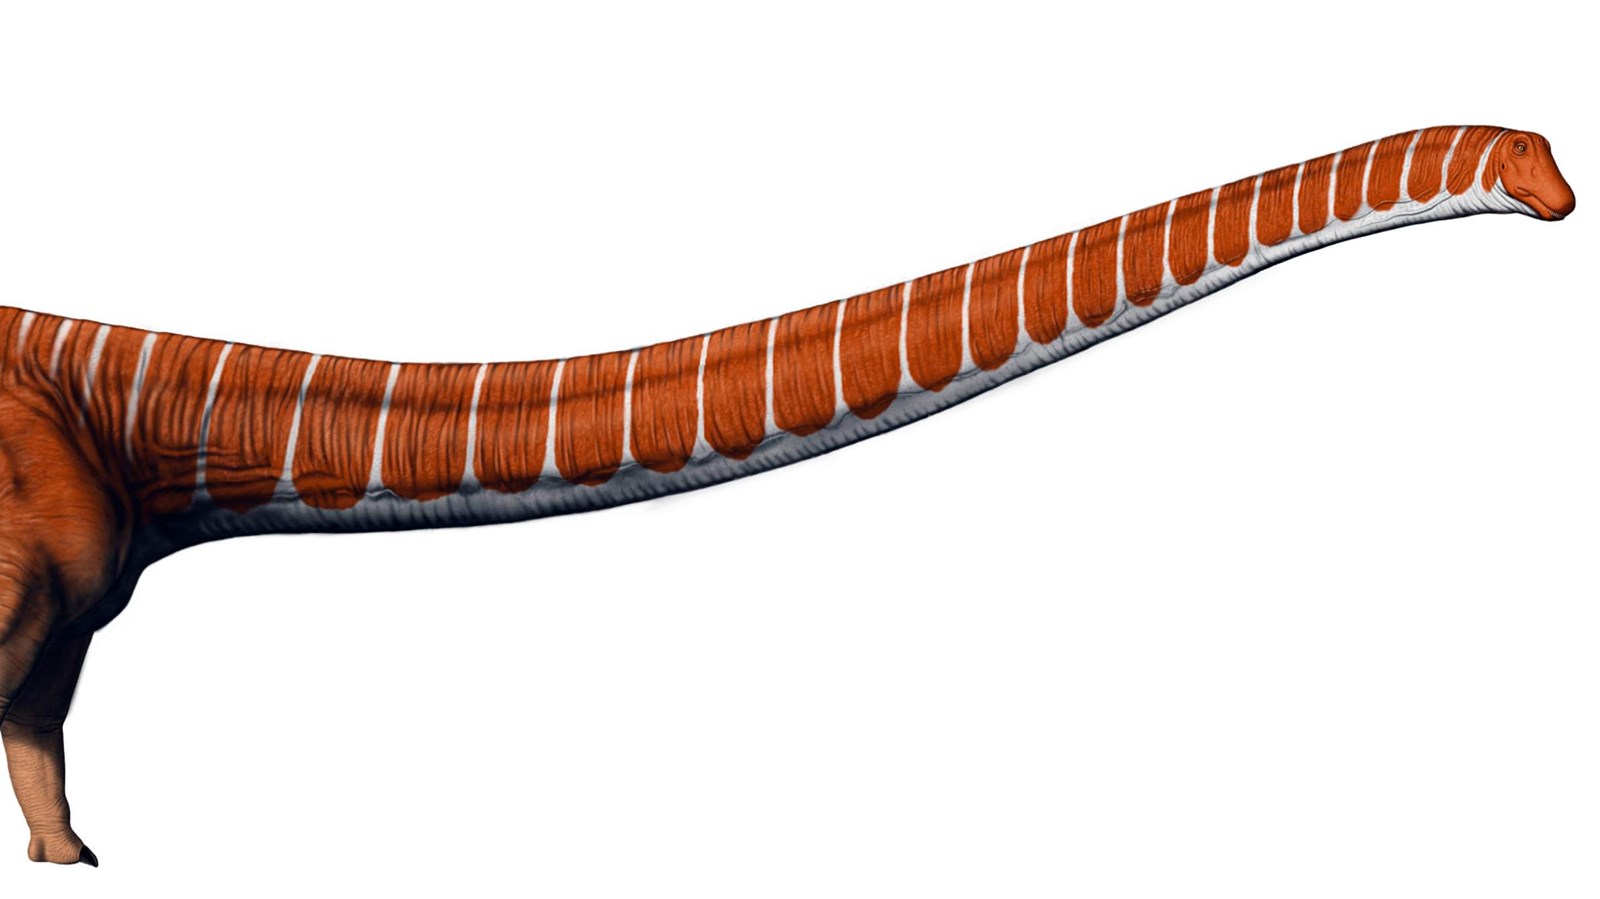 A long necked dinosaur with a very long whip-like tail.